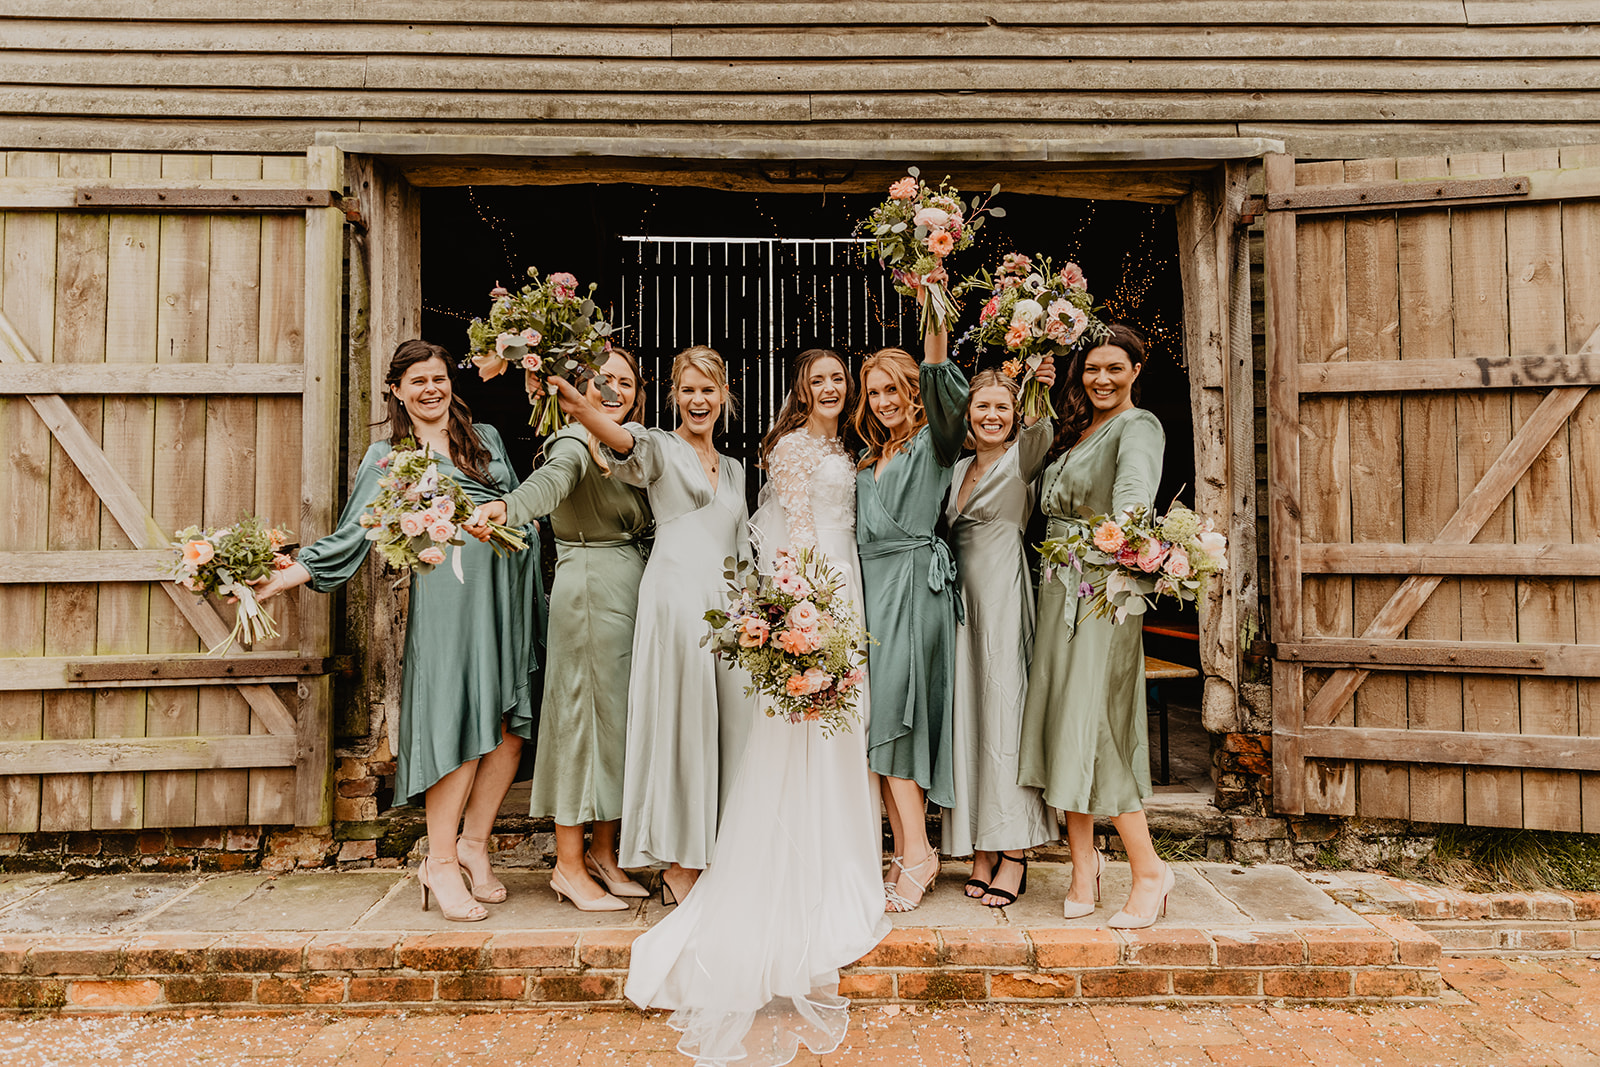 Bride and bridesmaids at a Secret Barn Wedding, West Sussex. By Olive Joy Photography